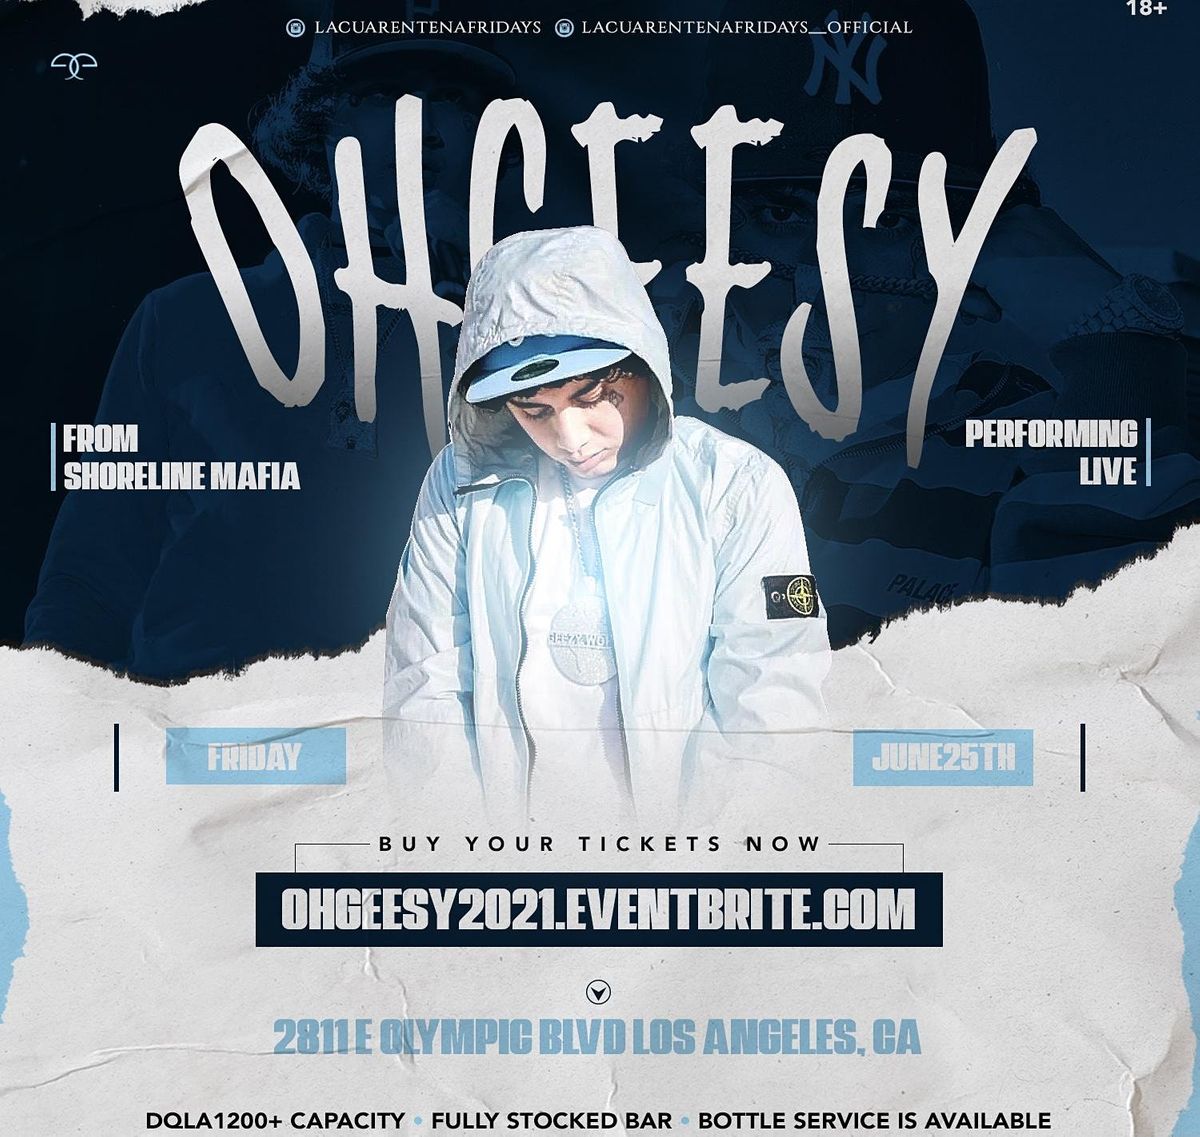 OHGEESY FROM SHORELINE MAFIA PERFORMING LIVE FRIDAY JUNE 25TH LOS ANGELES